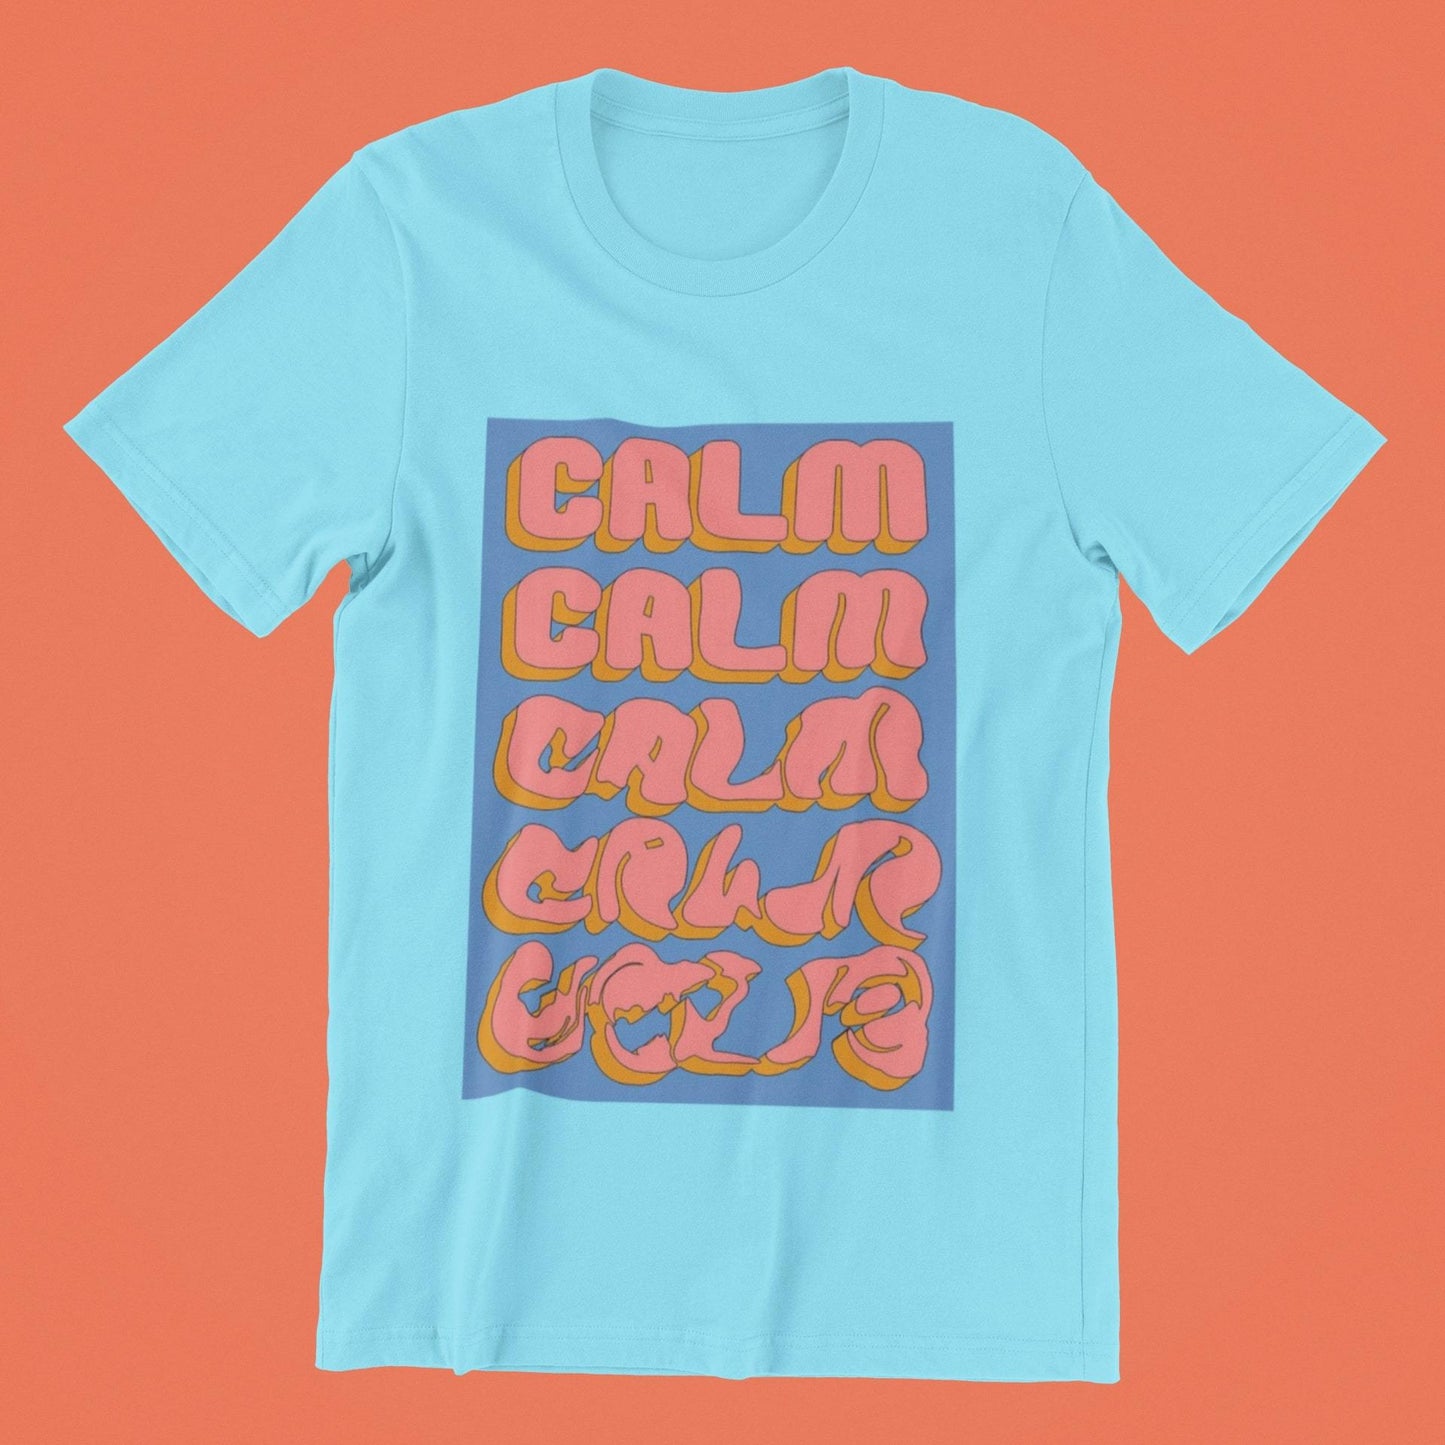 Calm Psychedelic Design T shirt for Men - Insane Tees